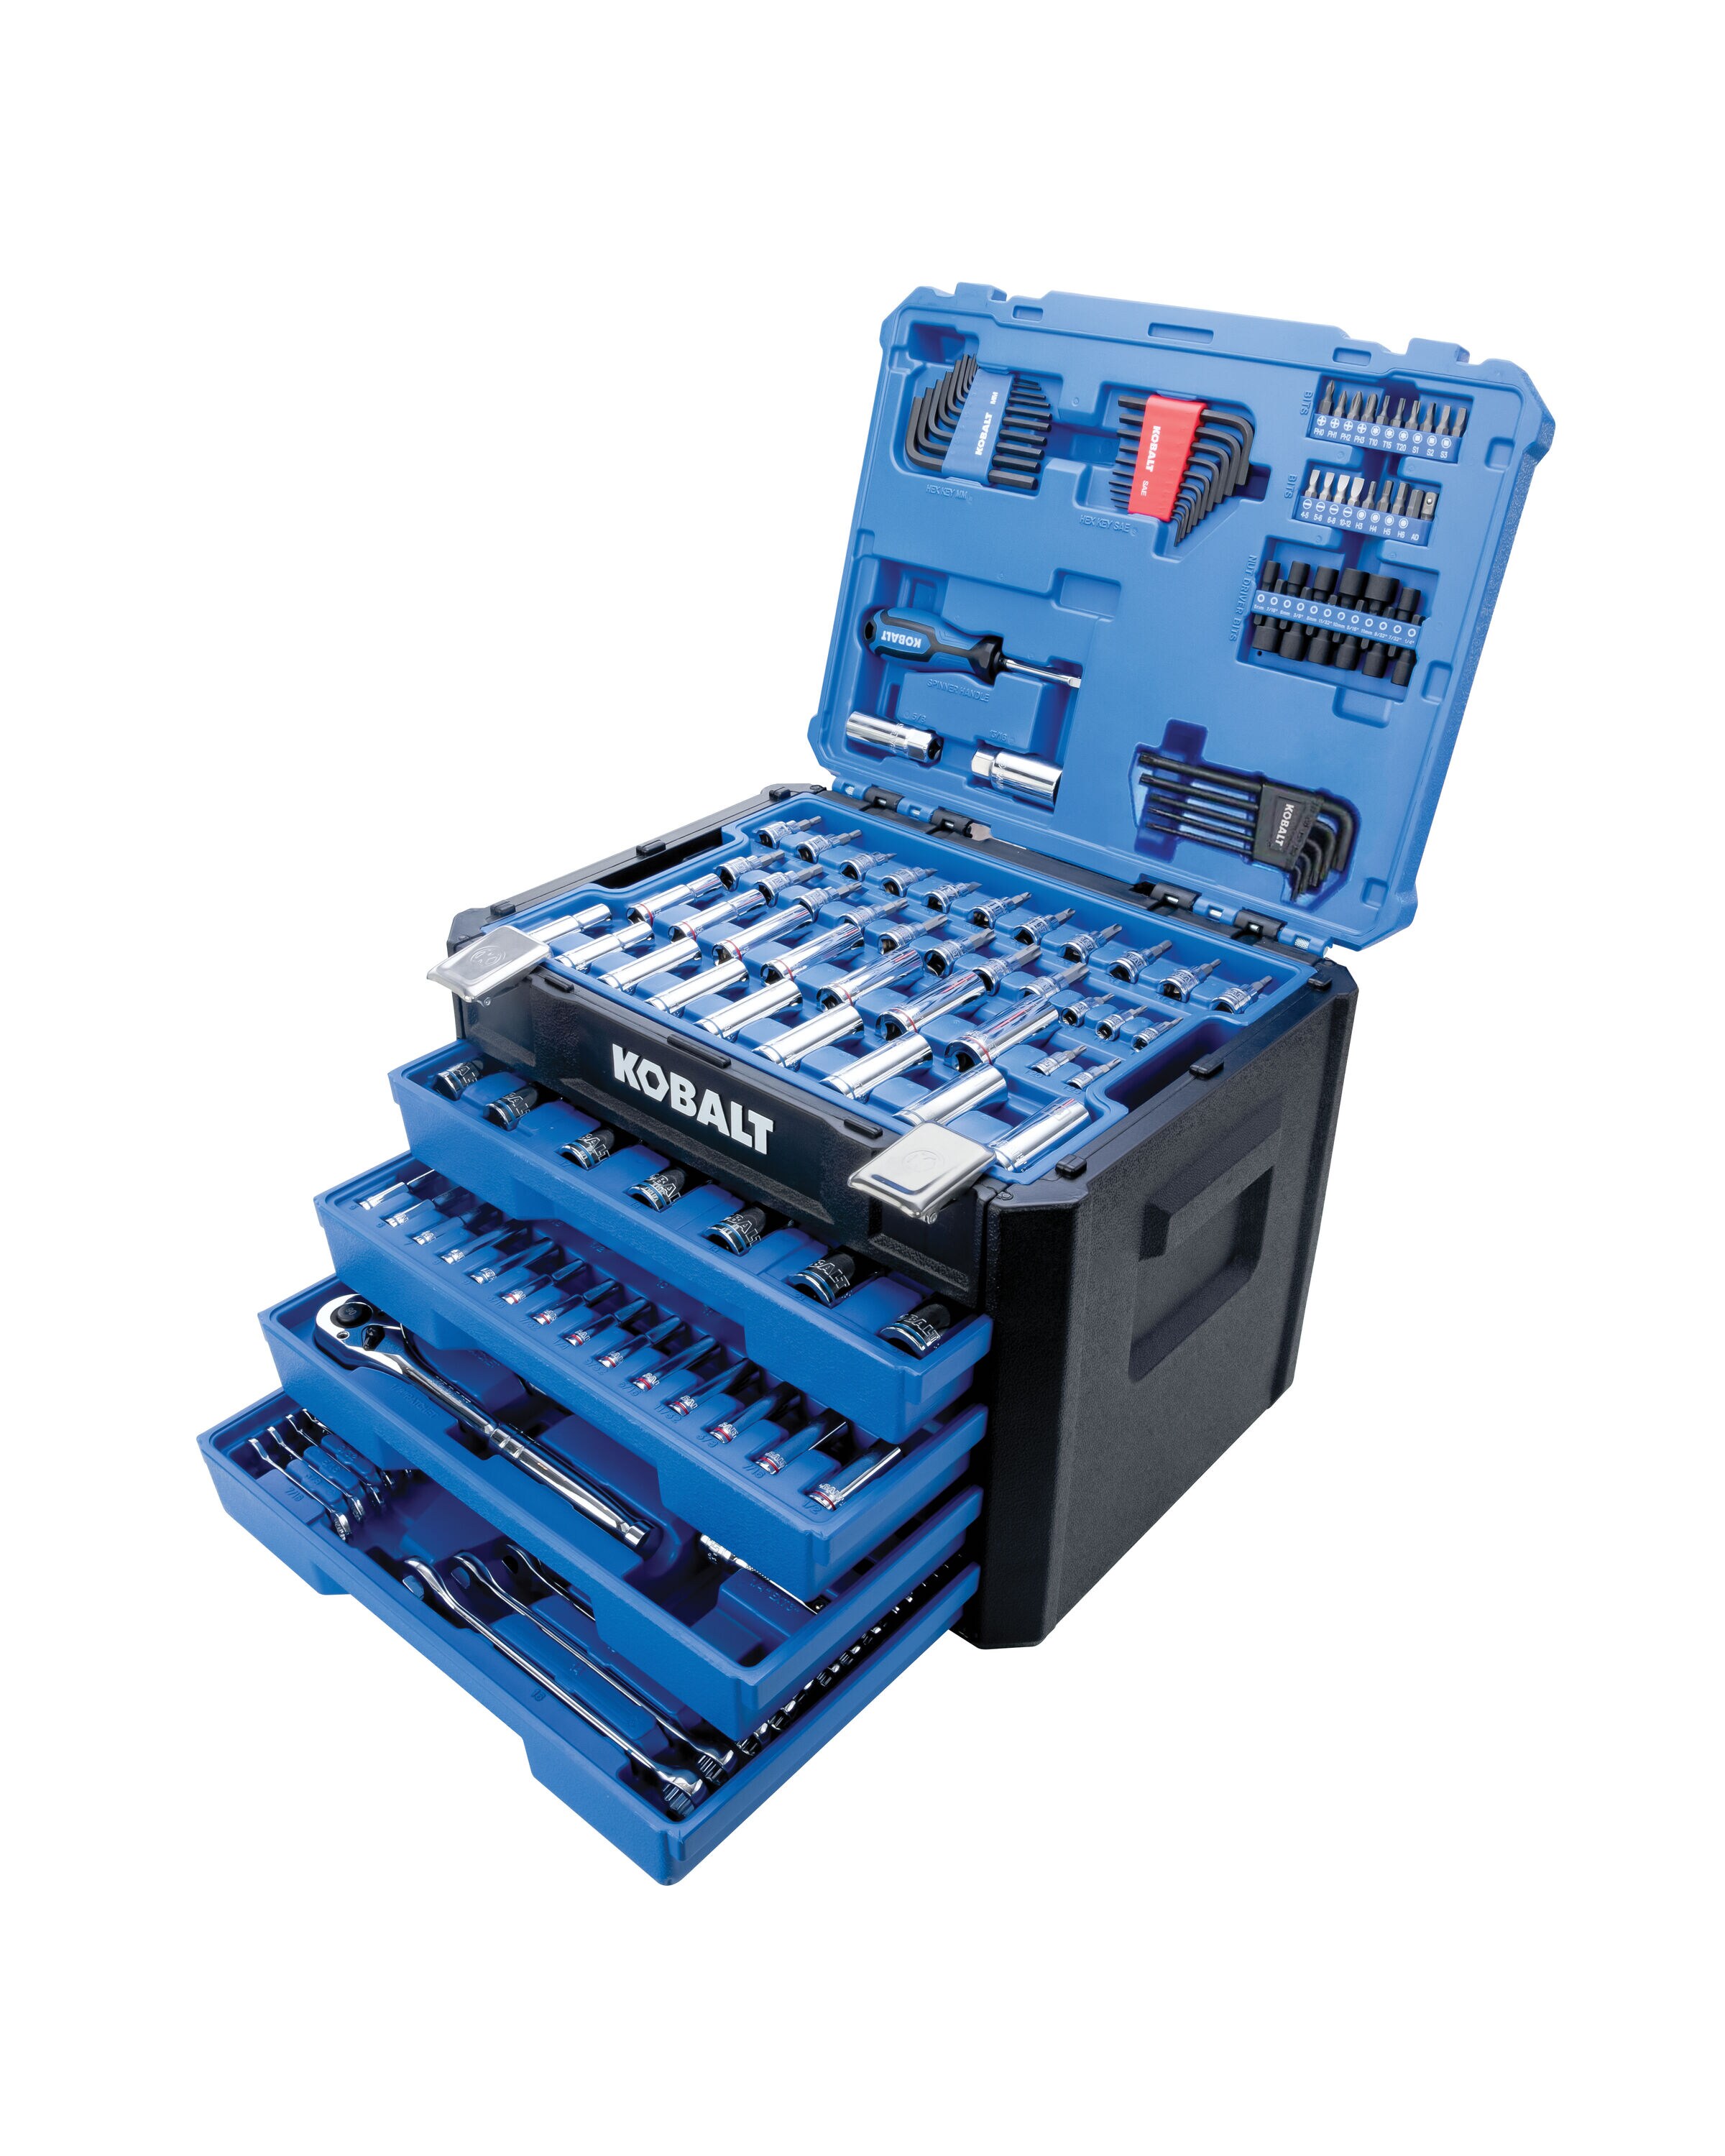 BEST Portable Tool Storage systems (RANKED) WATCH BEFORE YOU BUY